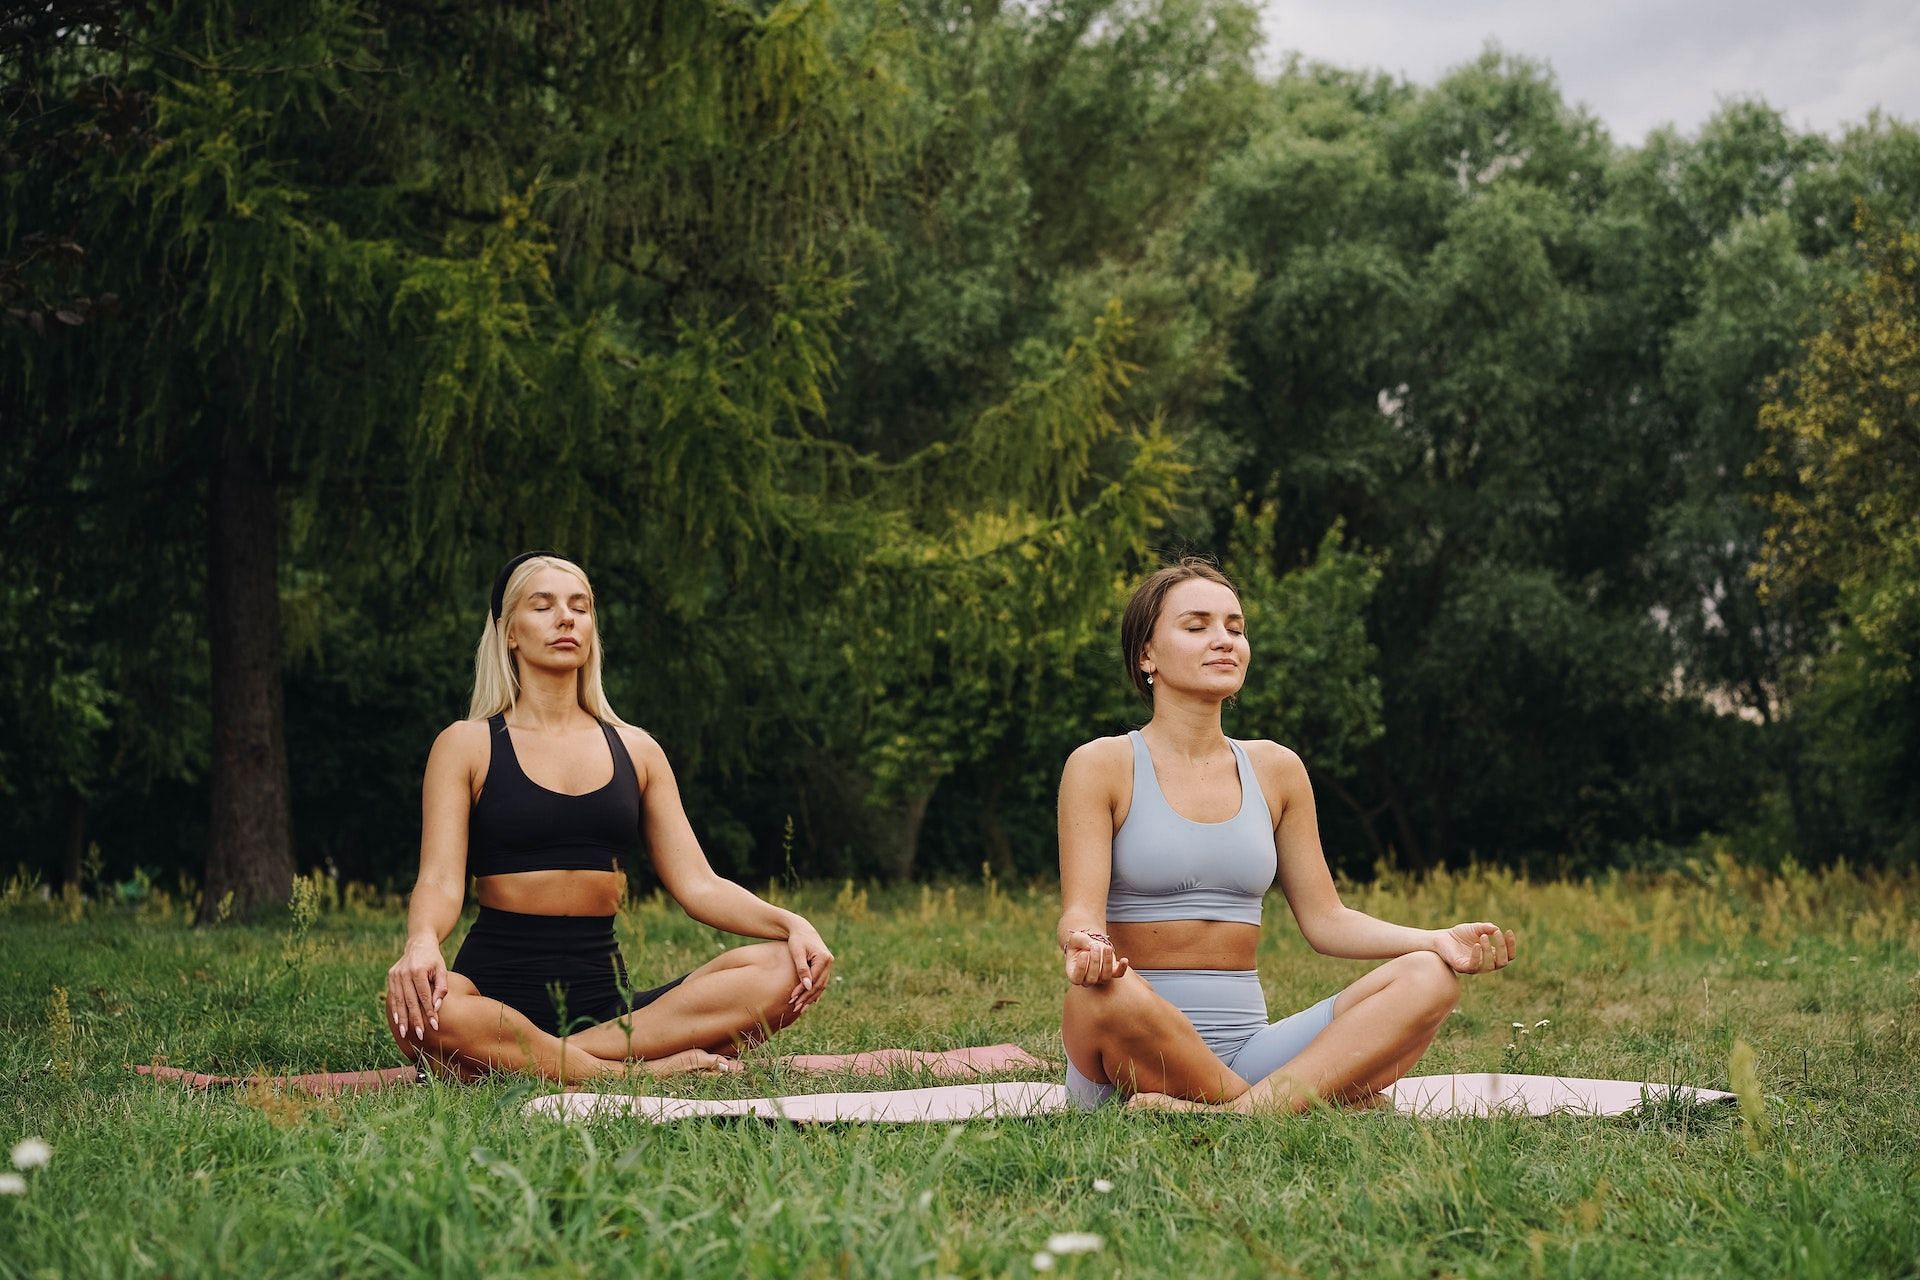 Yoga for morning activates the muscles and keeps you energetic. (Photo via Pexels/olia danilevich)